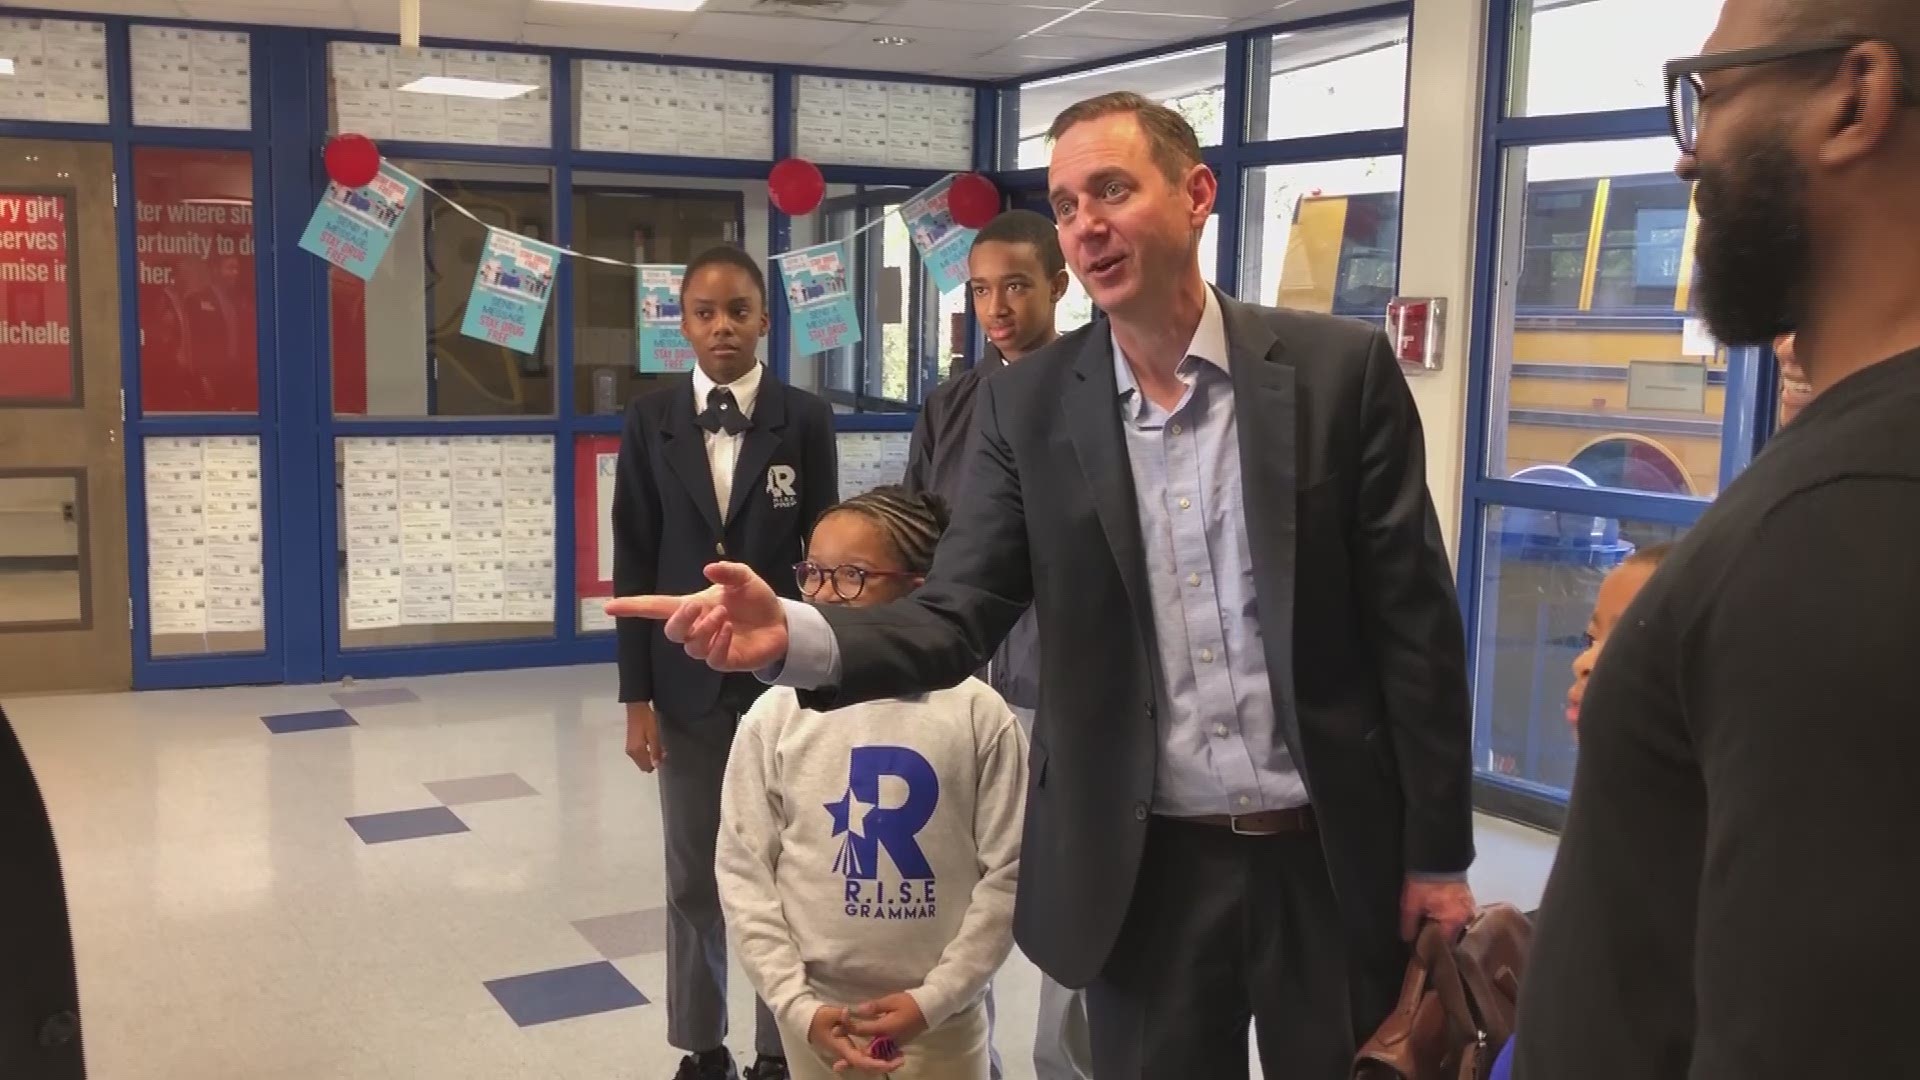 State House Representative, David Dreyer, stopped by for a tour of the RISE Schools